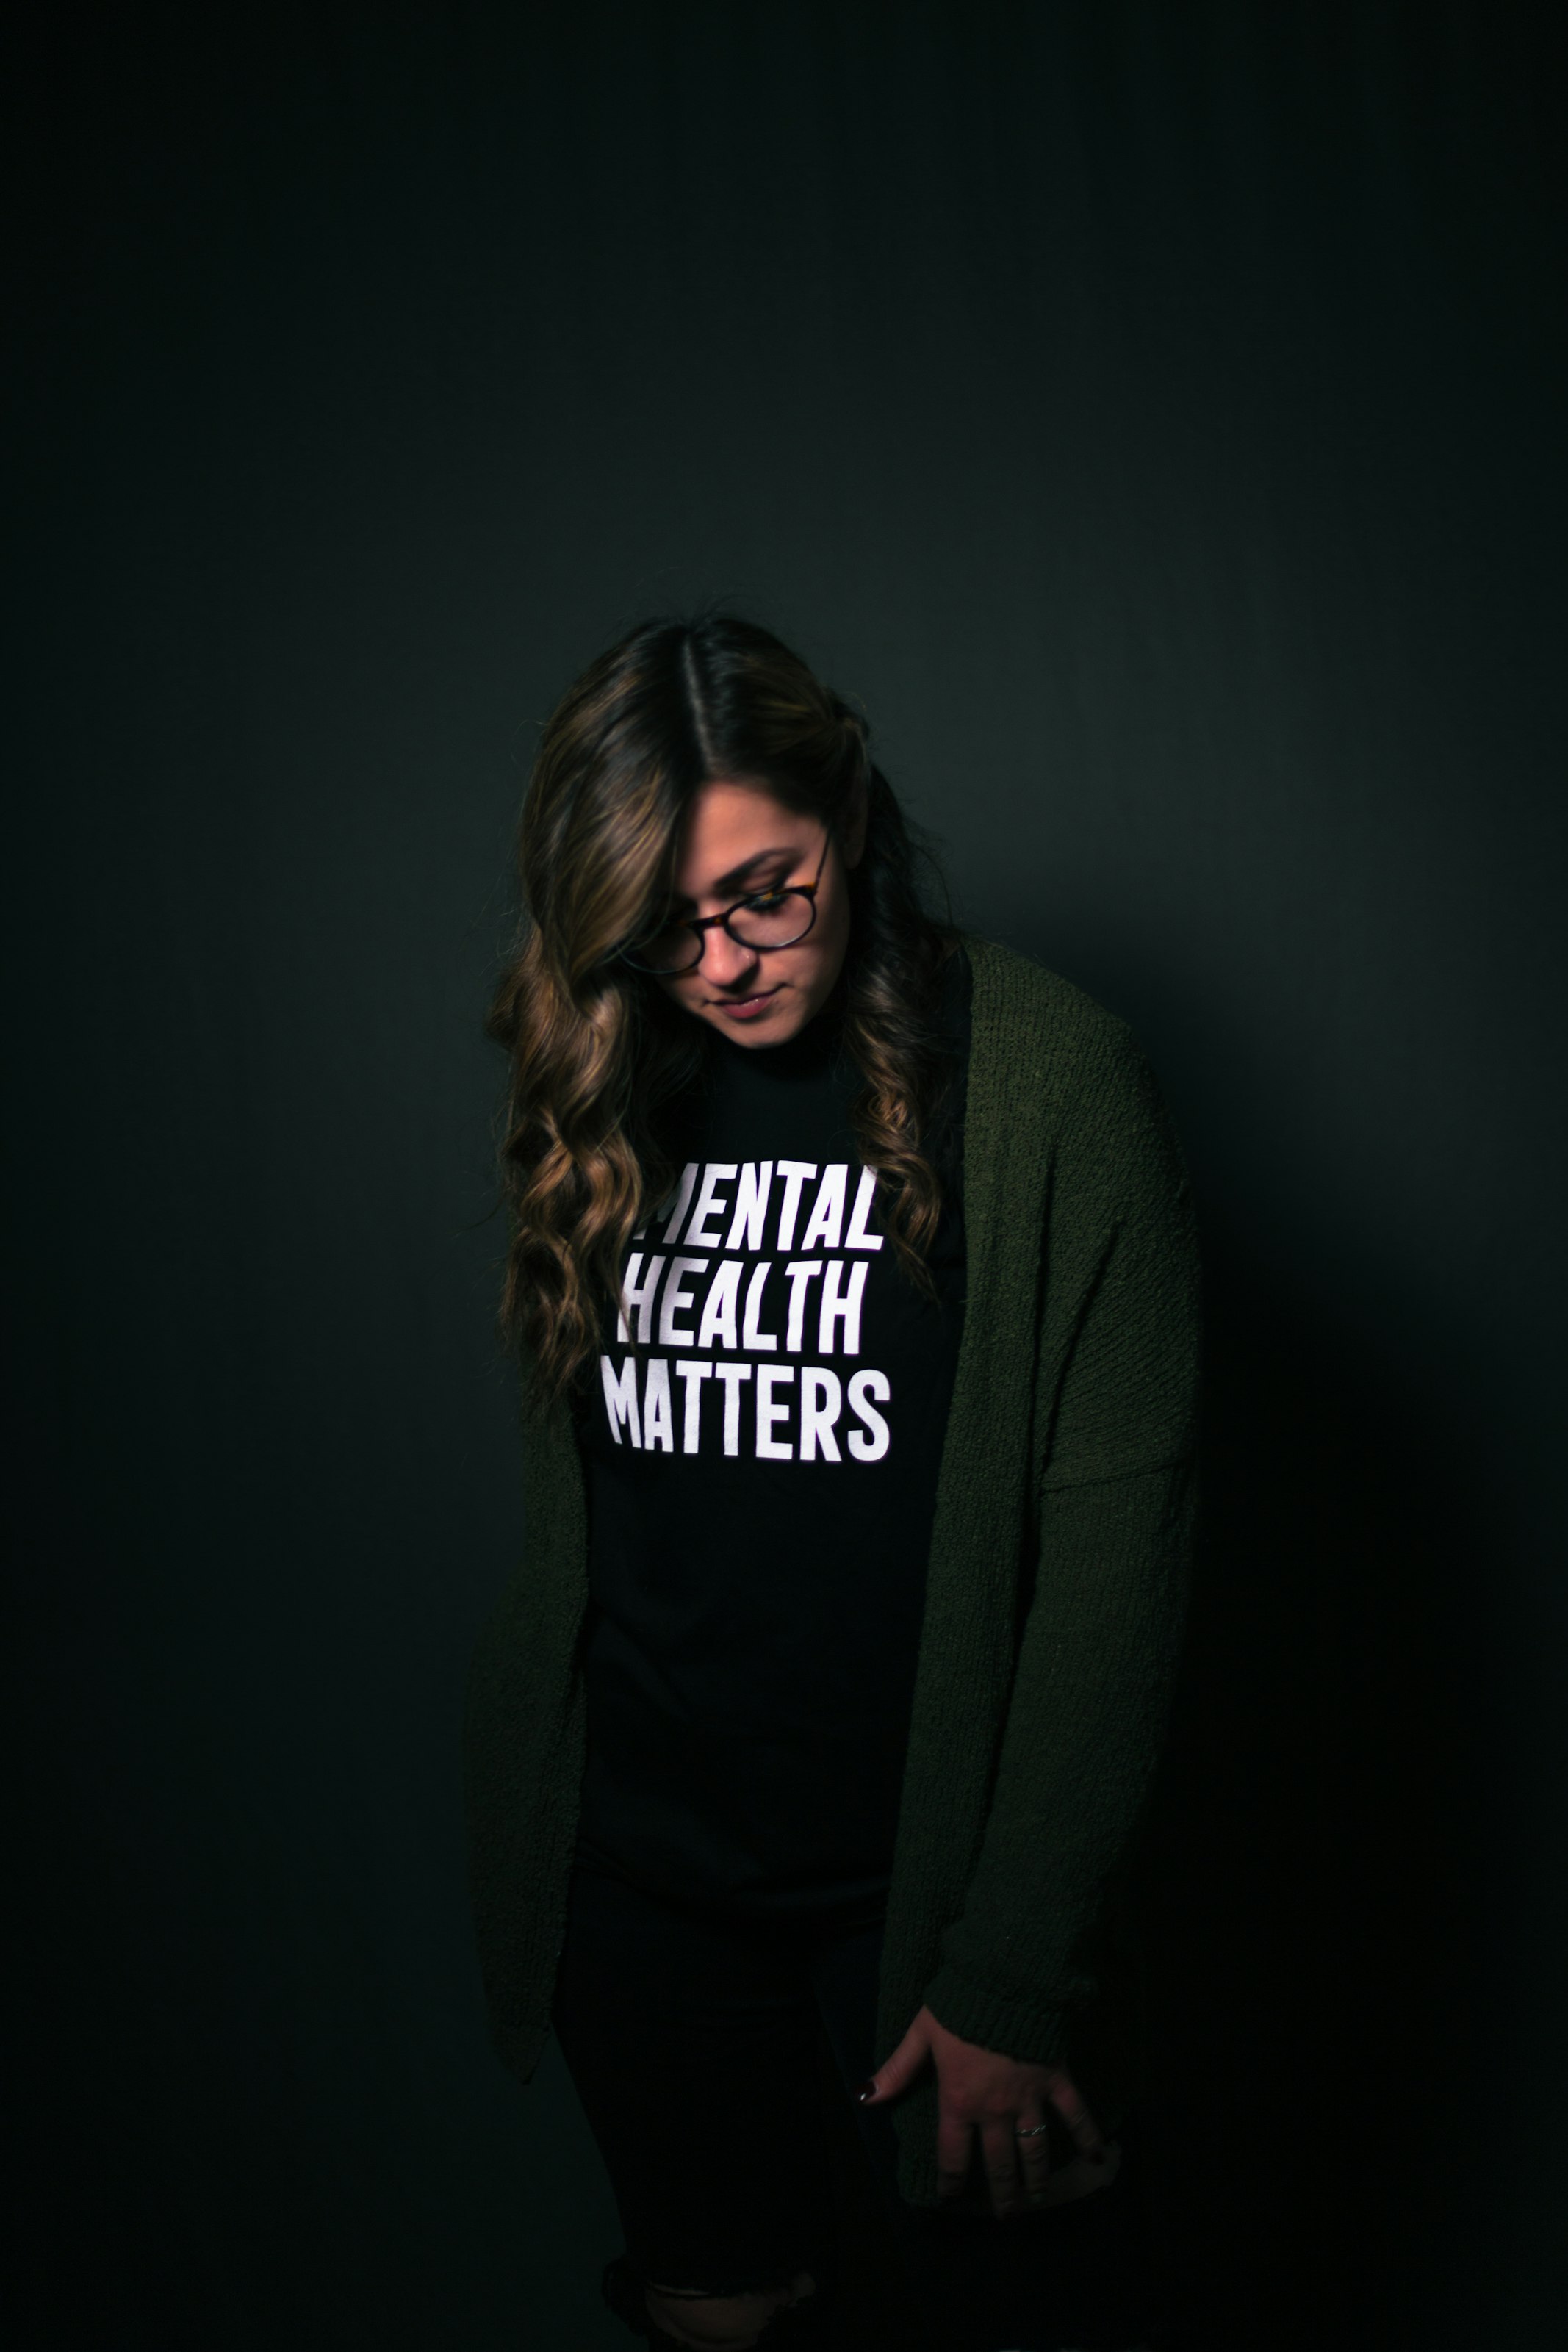 women looking down wearing a black shirt with white text "mental health matters"